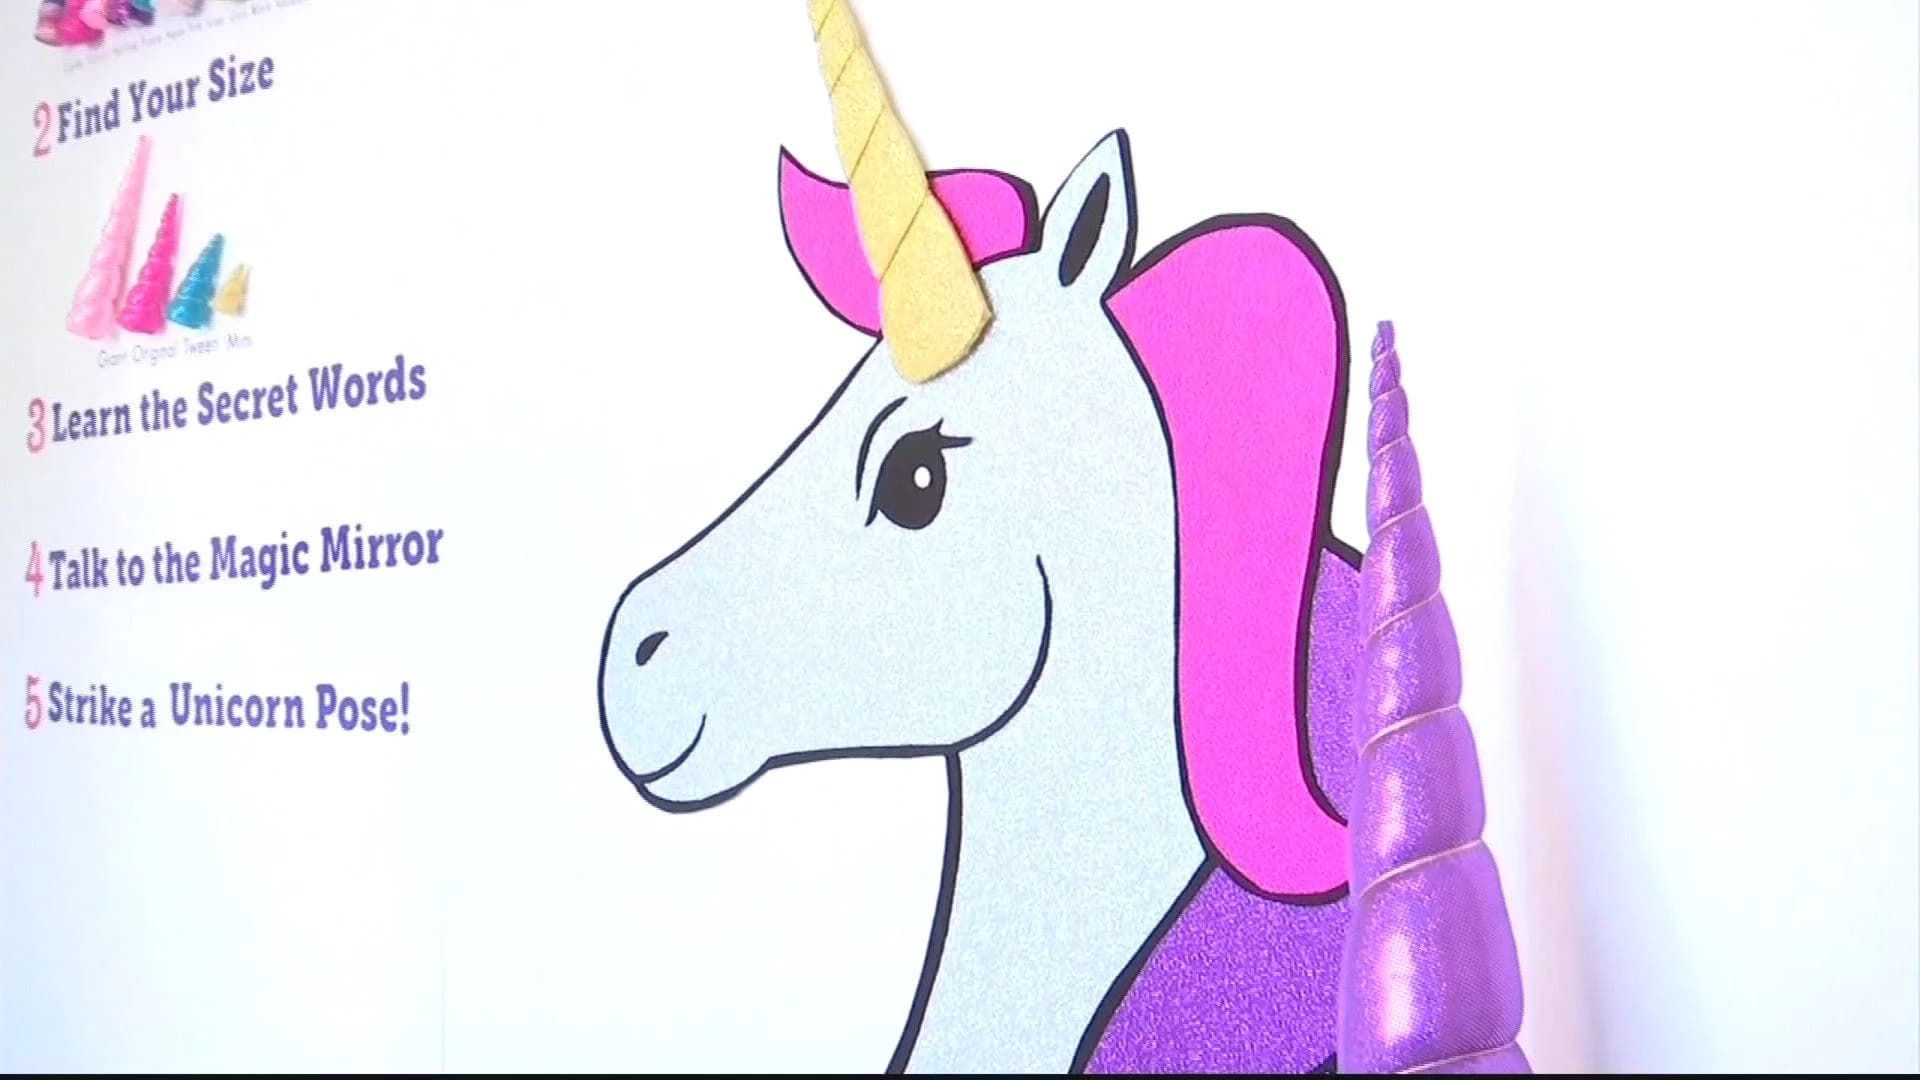 Unicorn-themed store to open in Prospect Heights